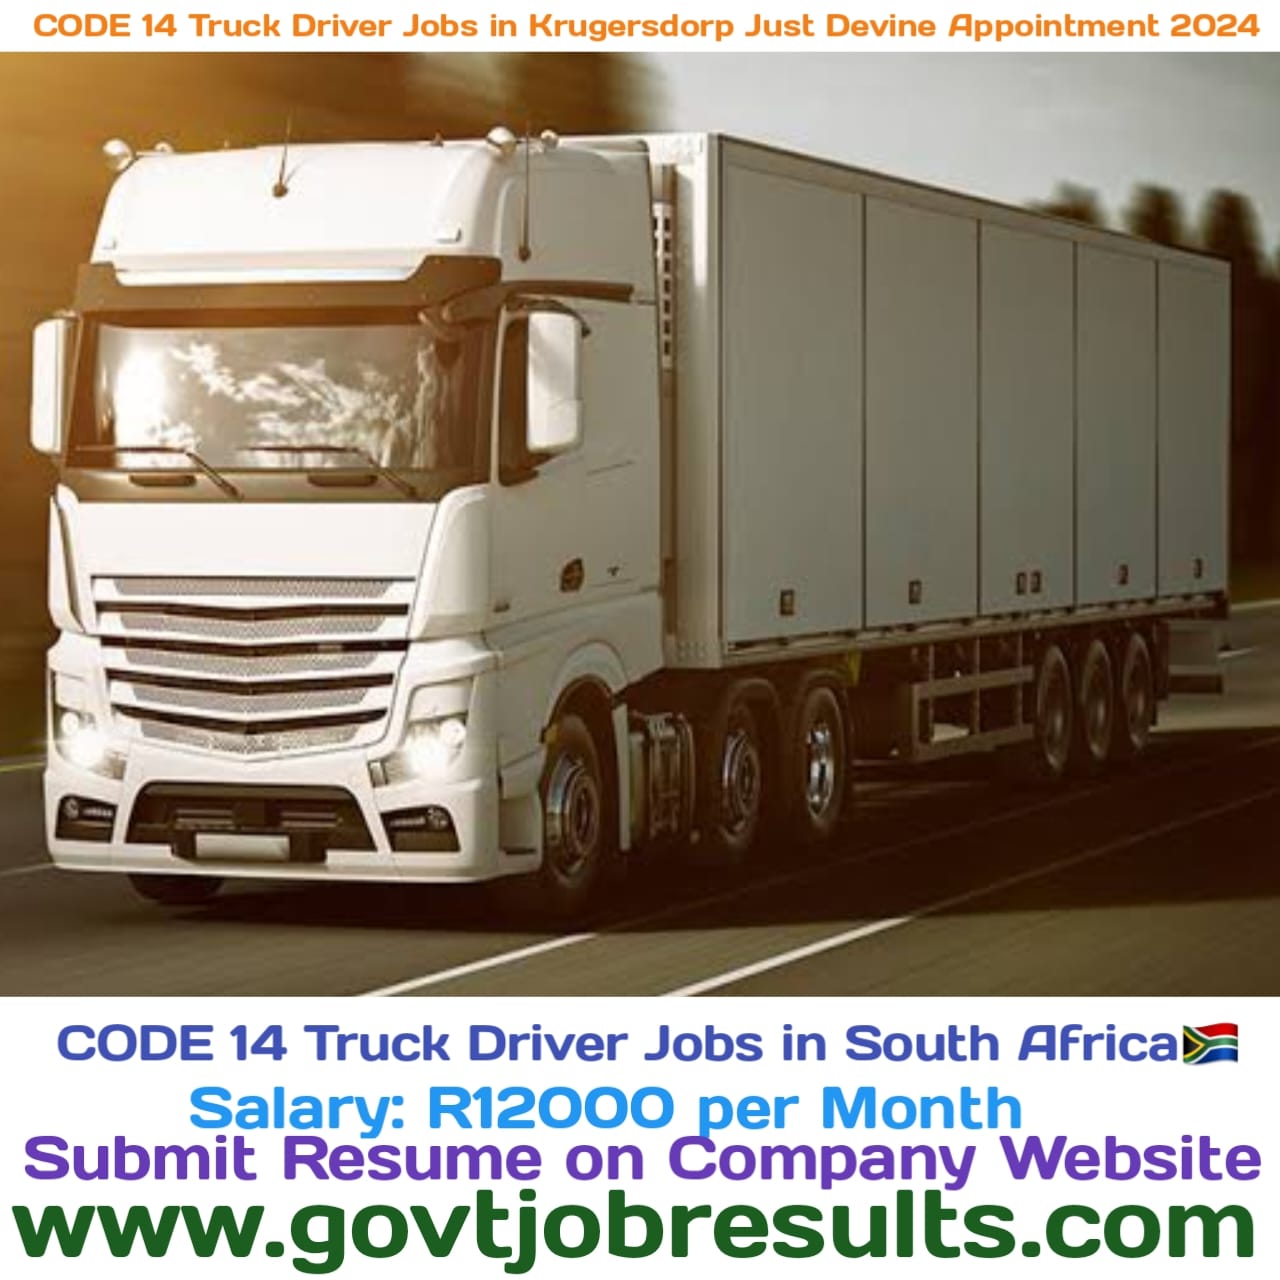 CODE 14 Truck Driver Jobs in Krugersdorp Just Devine Appointment 2024

CODE 14 Truck Driver Jobs in South Africas

Salary: R12000 per Month .
Submit Resume on Company Website

www.govtjobresults.com